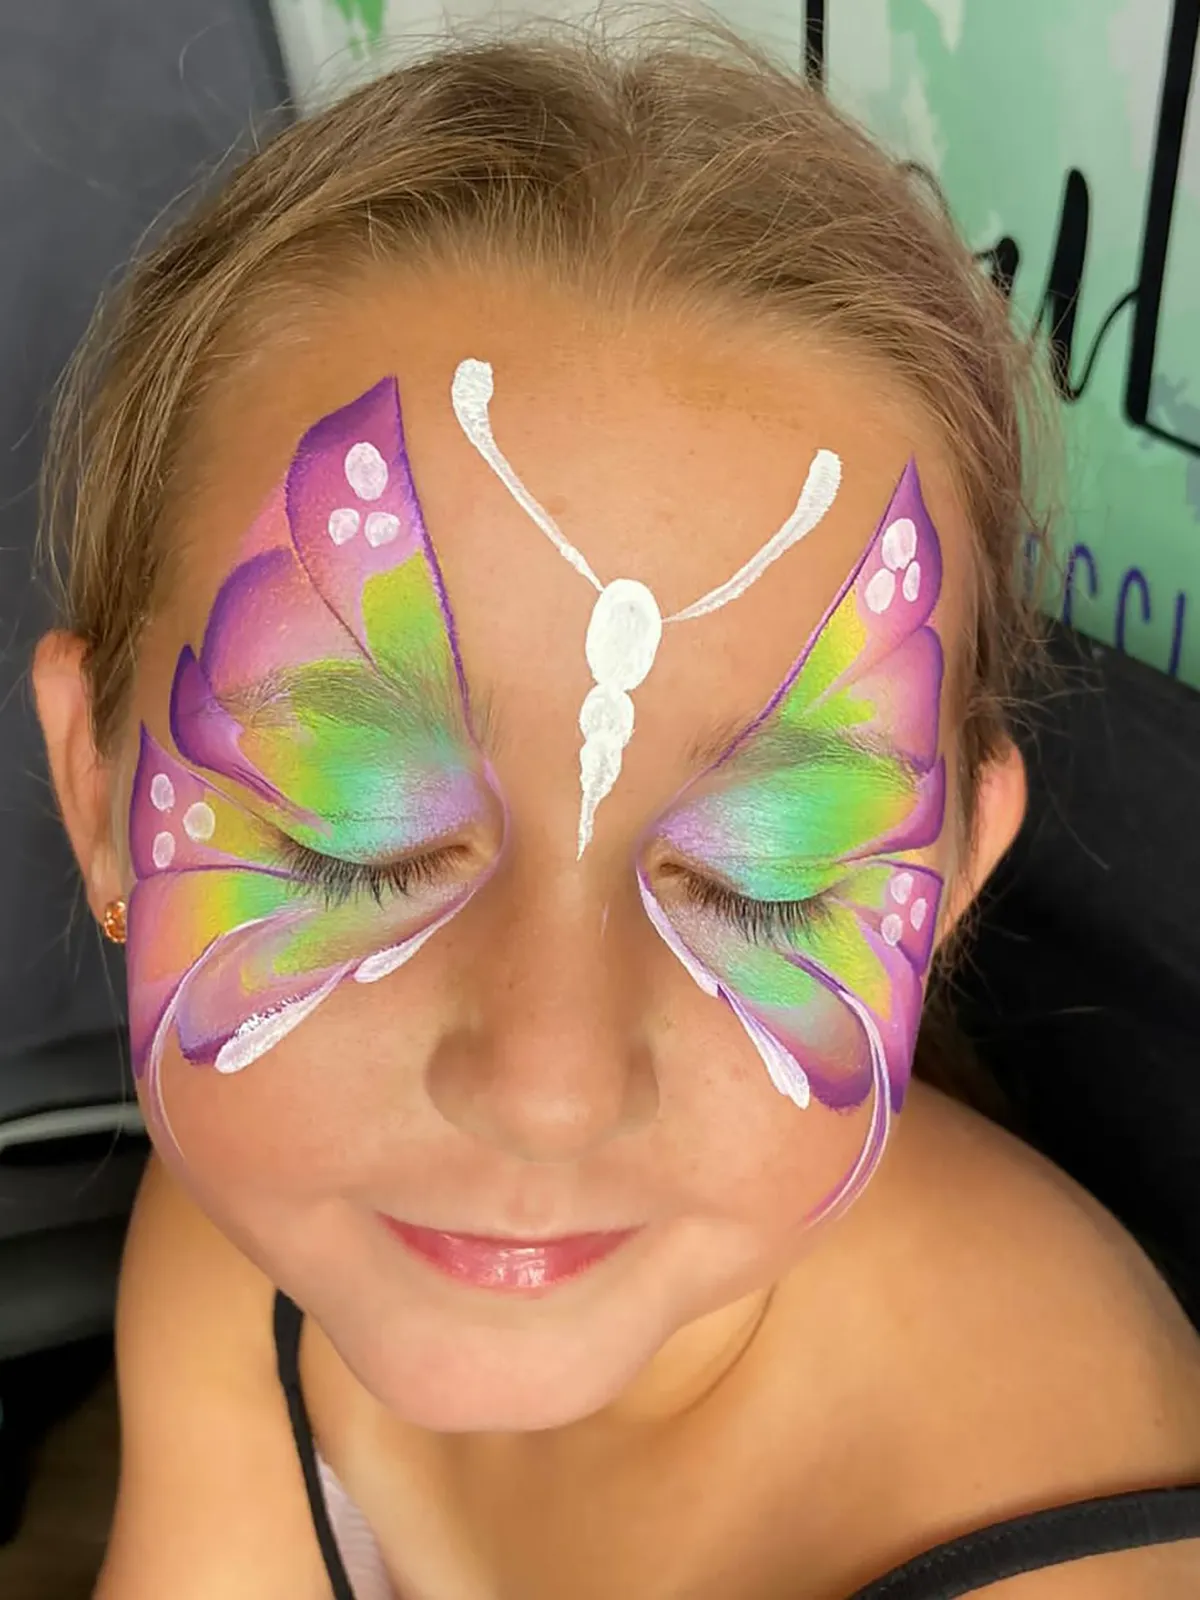 36 easy face painting ideas for kids - Gathered